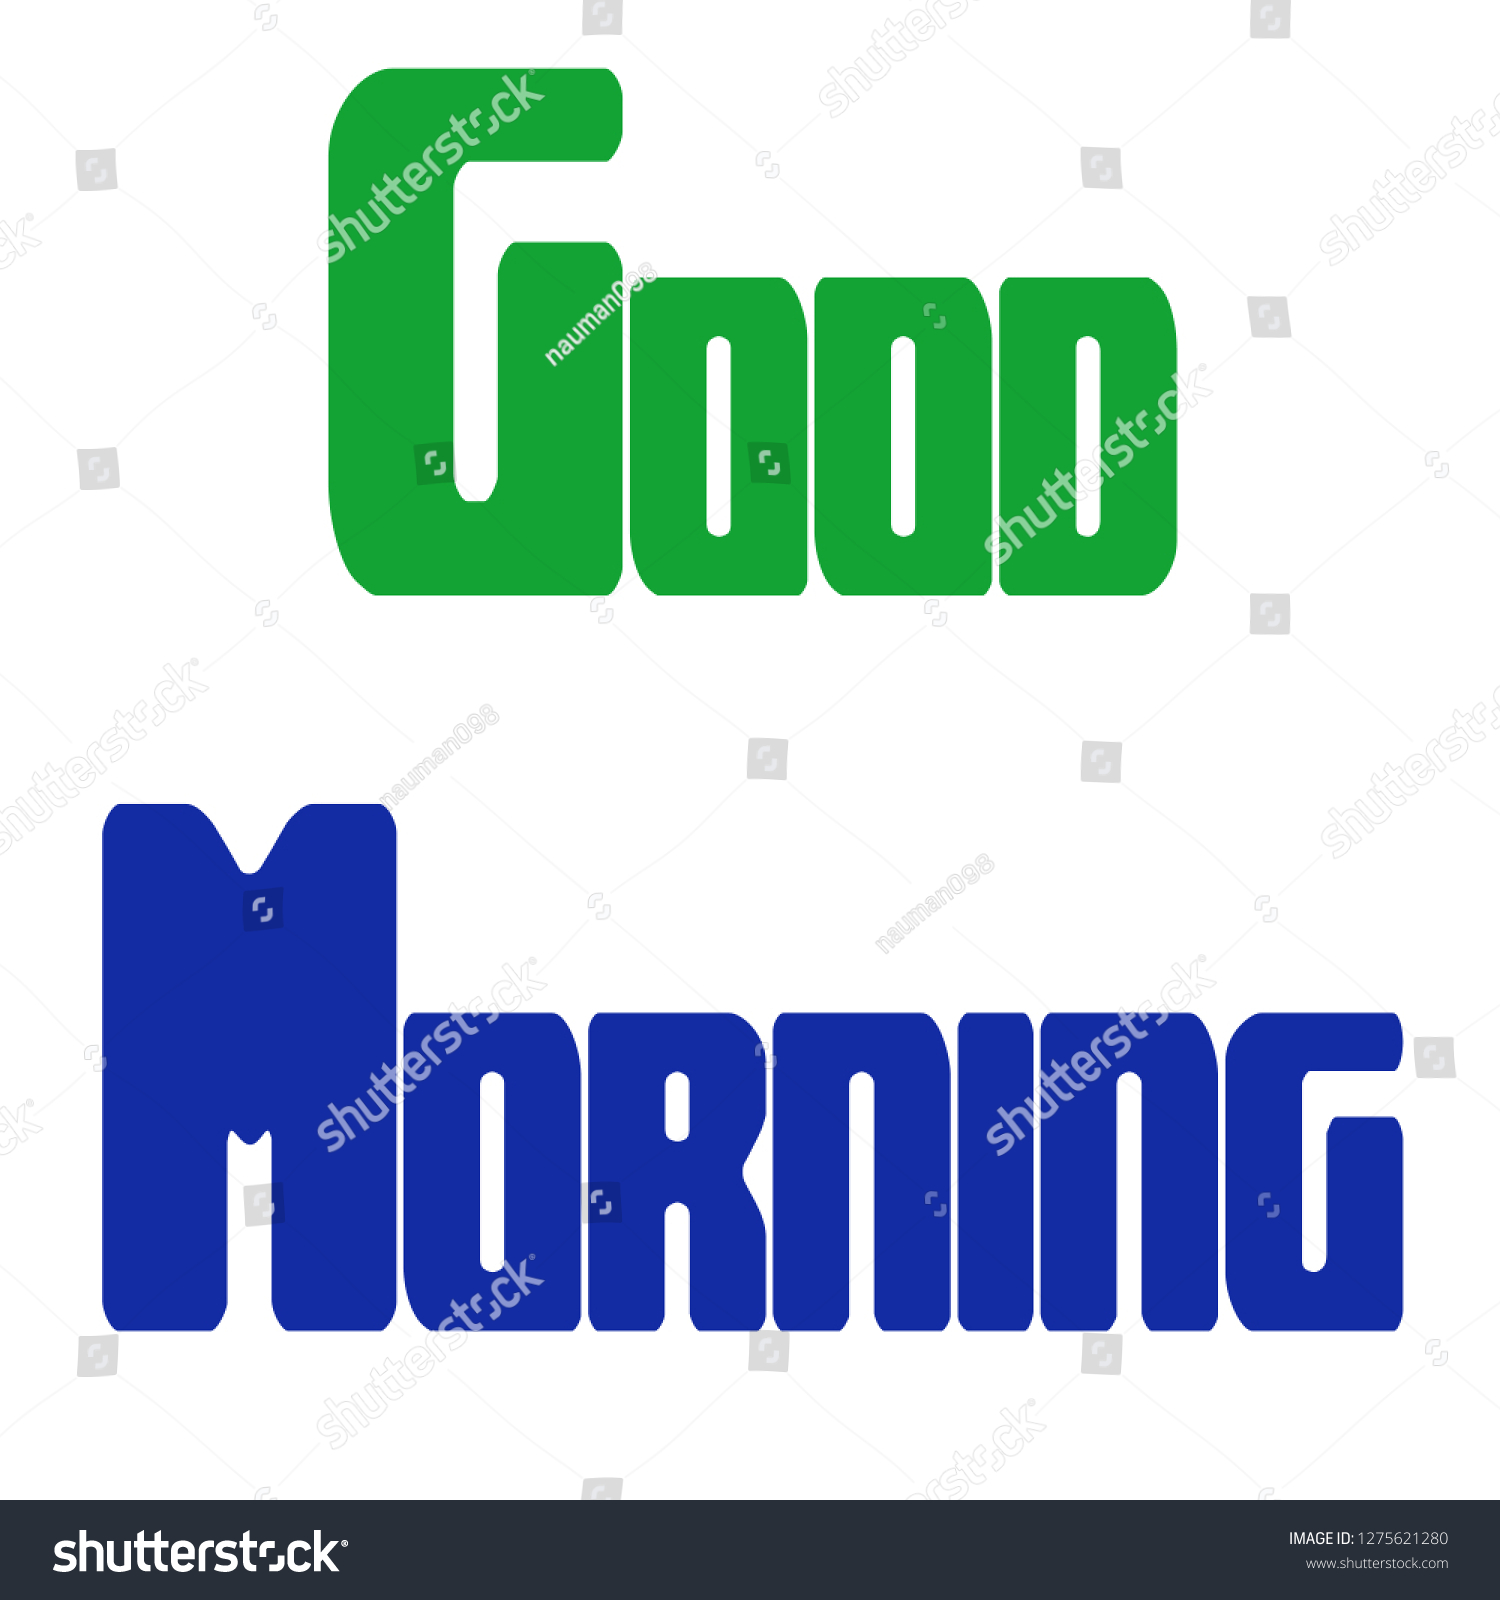 Good Morning Greetings Colours Styles Stock Illustration 1275621280 ...